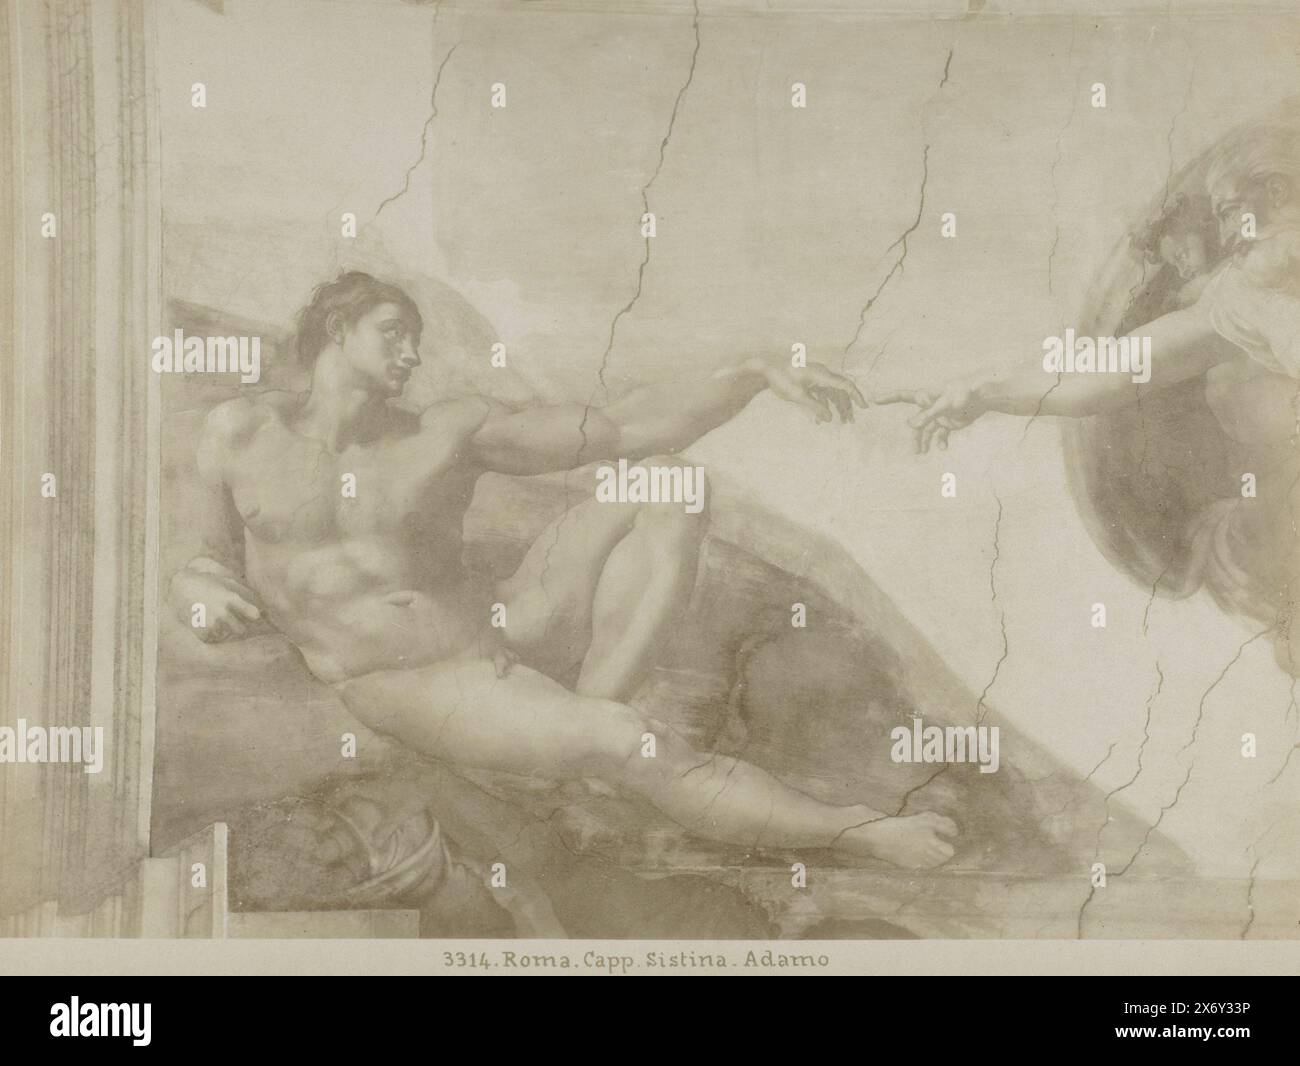 Photo reproduction of the fresco The Creation of Adam by Michelangelo in the Sistine Chapel, Roma. Capp. Sistina. Adamo (title on object), photograph, anonymous, after painting by: Michelangelo, (mentioned on object), Vaticaanstad, 1851 - 1900, paper, albumen print, height, 197 mm × width, 257 mm, height, 258 mm × width, 358 mm Stock Photo